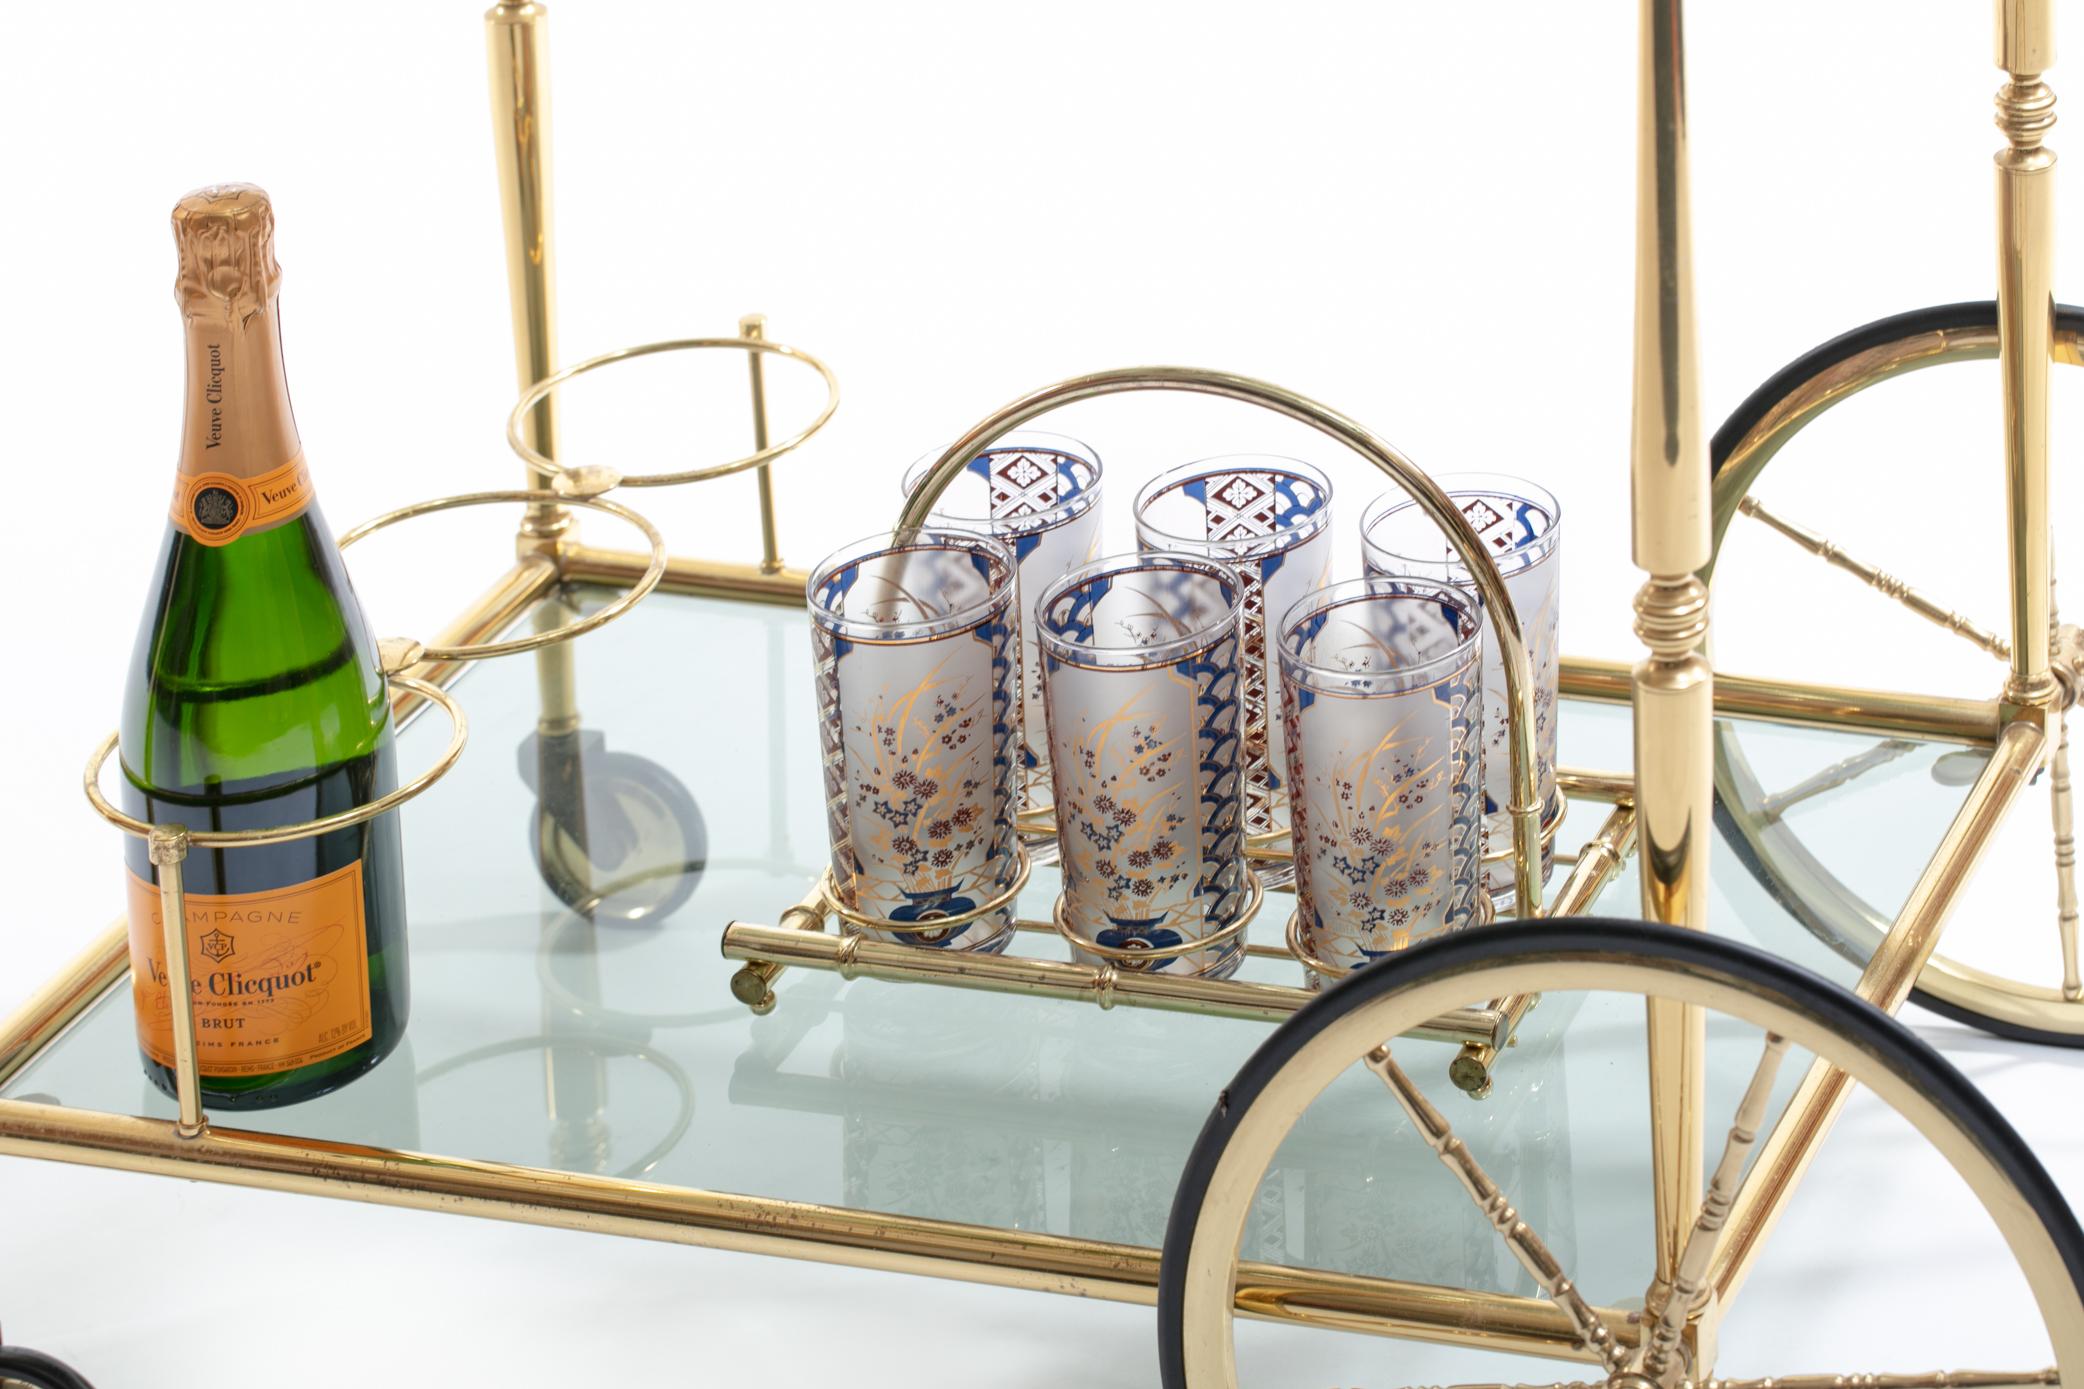 22-Karat Gold Chinoiserie Themed Tumbler Glasses & Brass Bamboo Caddy c. 1960s In Good Condition For Sale In Saint Louis, MO